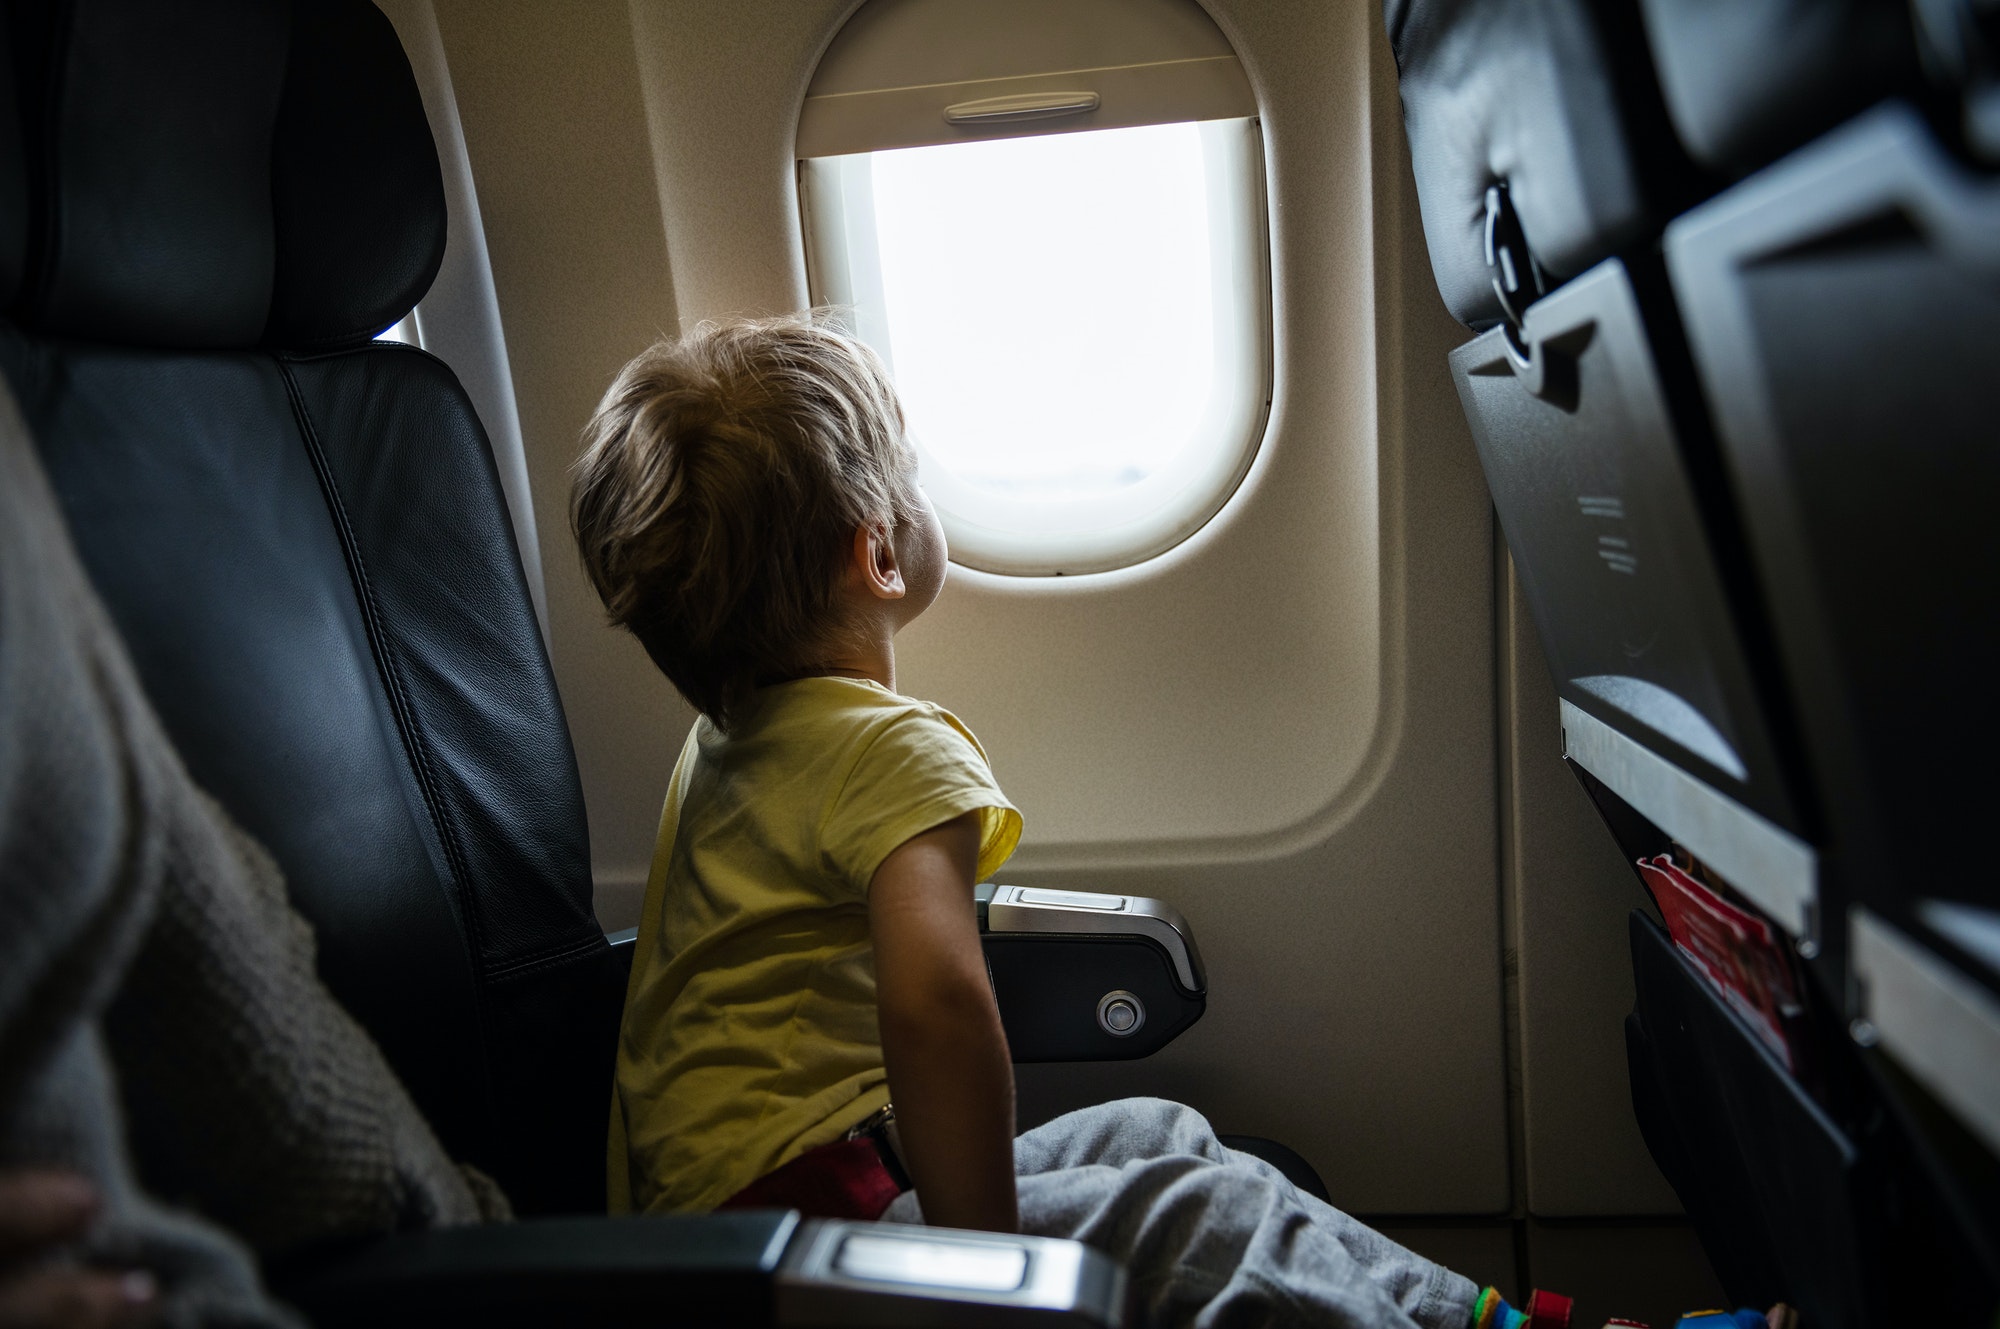 Little boy looking out of window in airplane